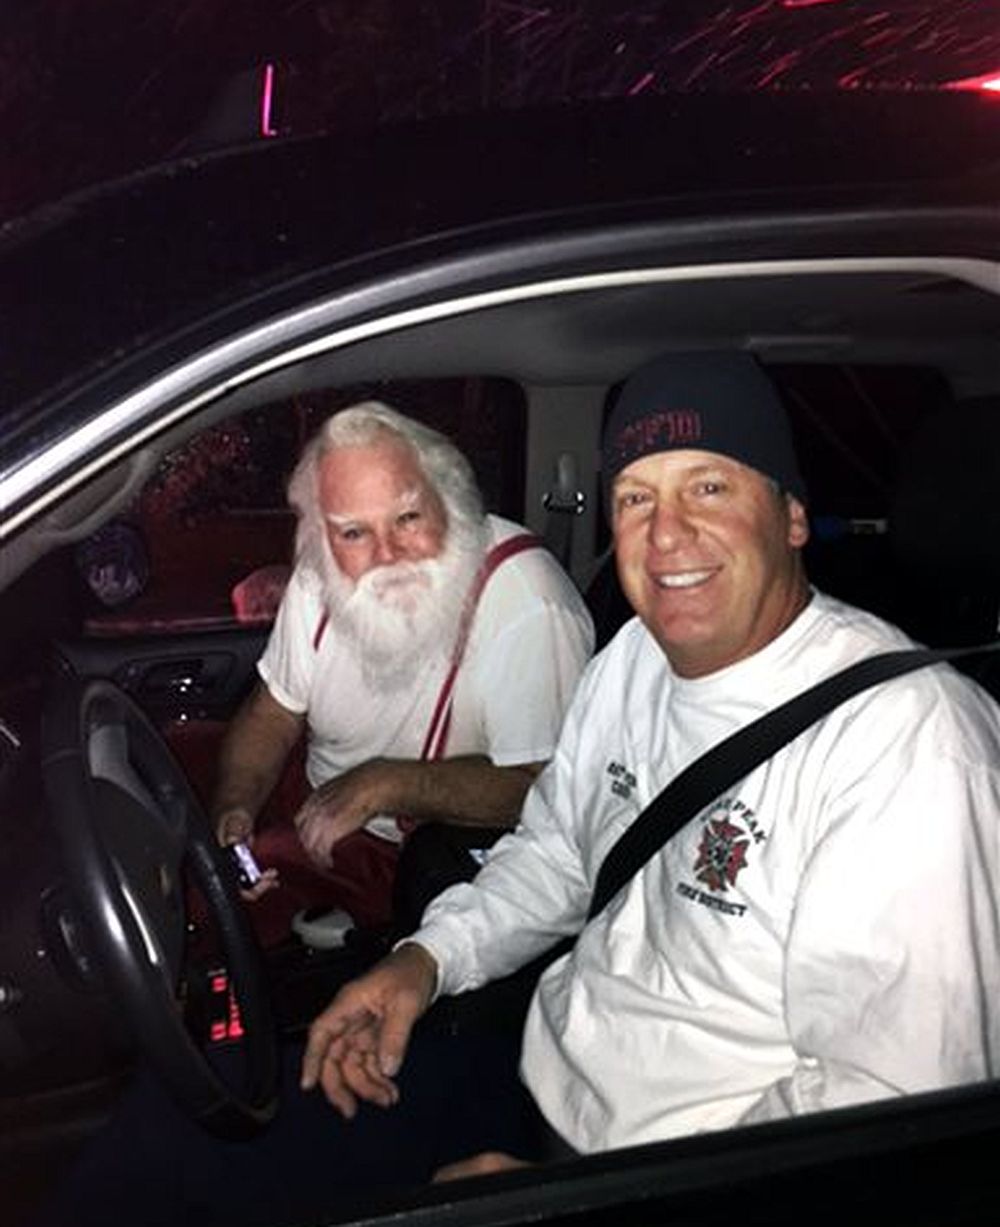 Utah firefighters help man dressed as Santa after auto fire